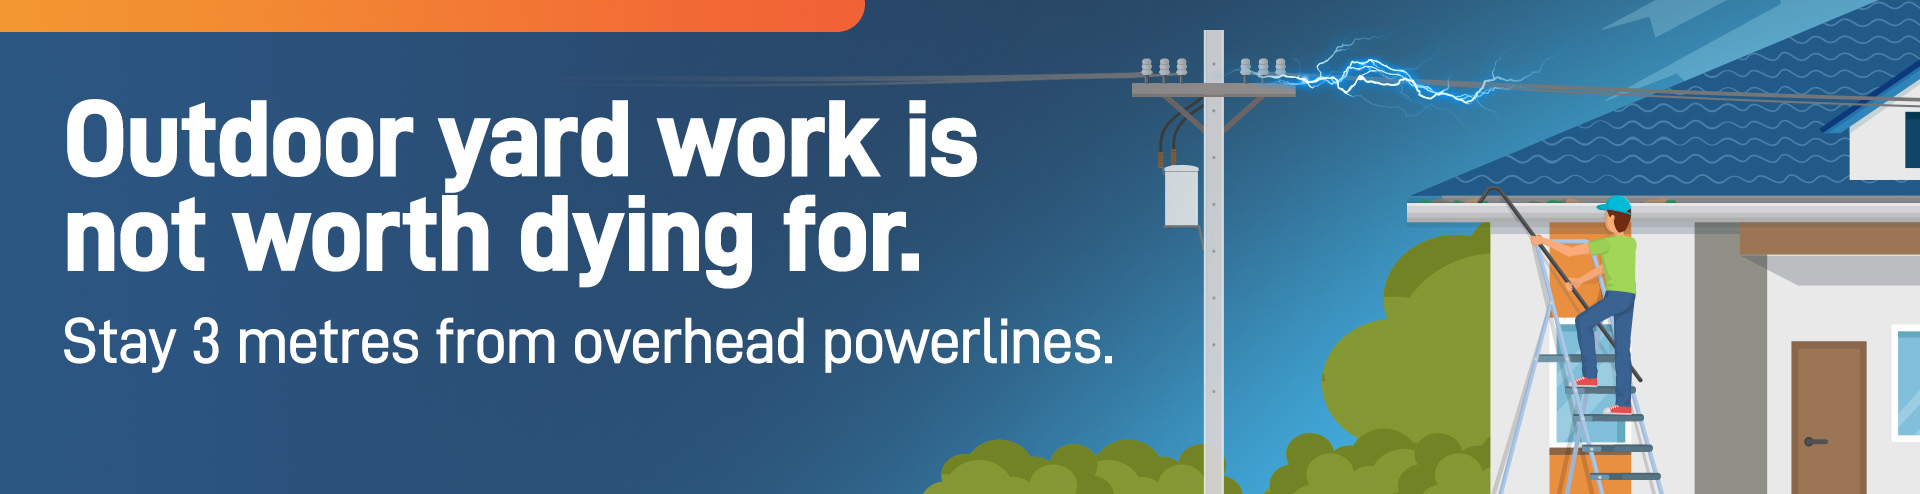 Outdoor yard work is not worth dying for. Stay 3 metres from overhead powerlines.